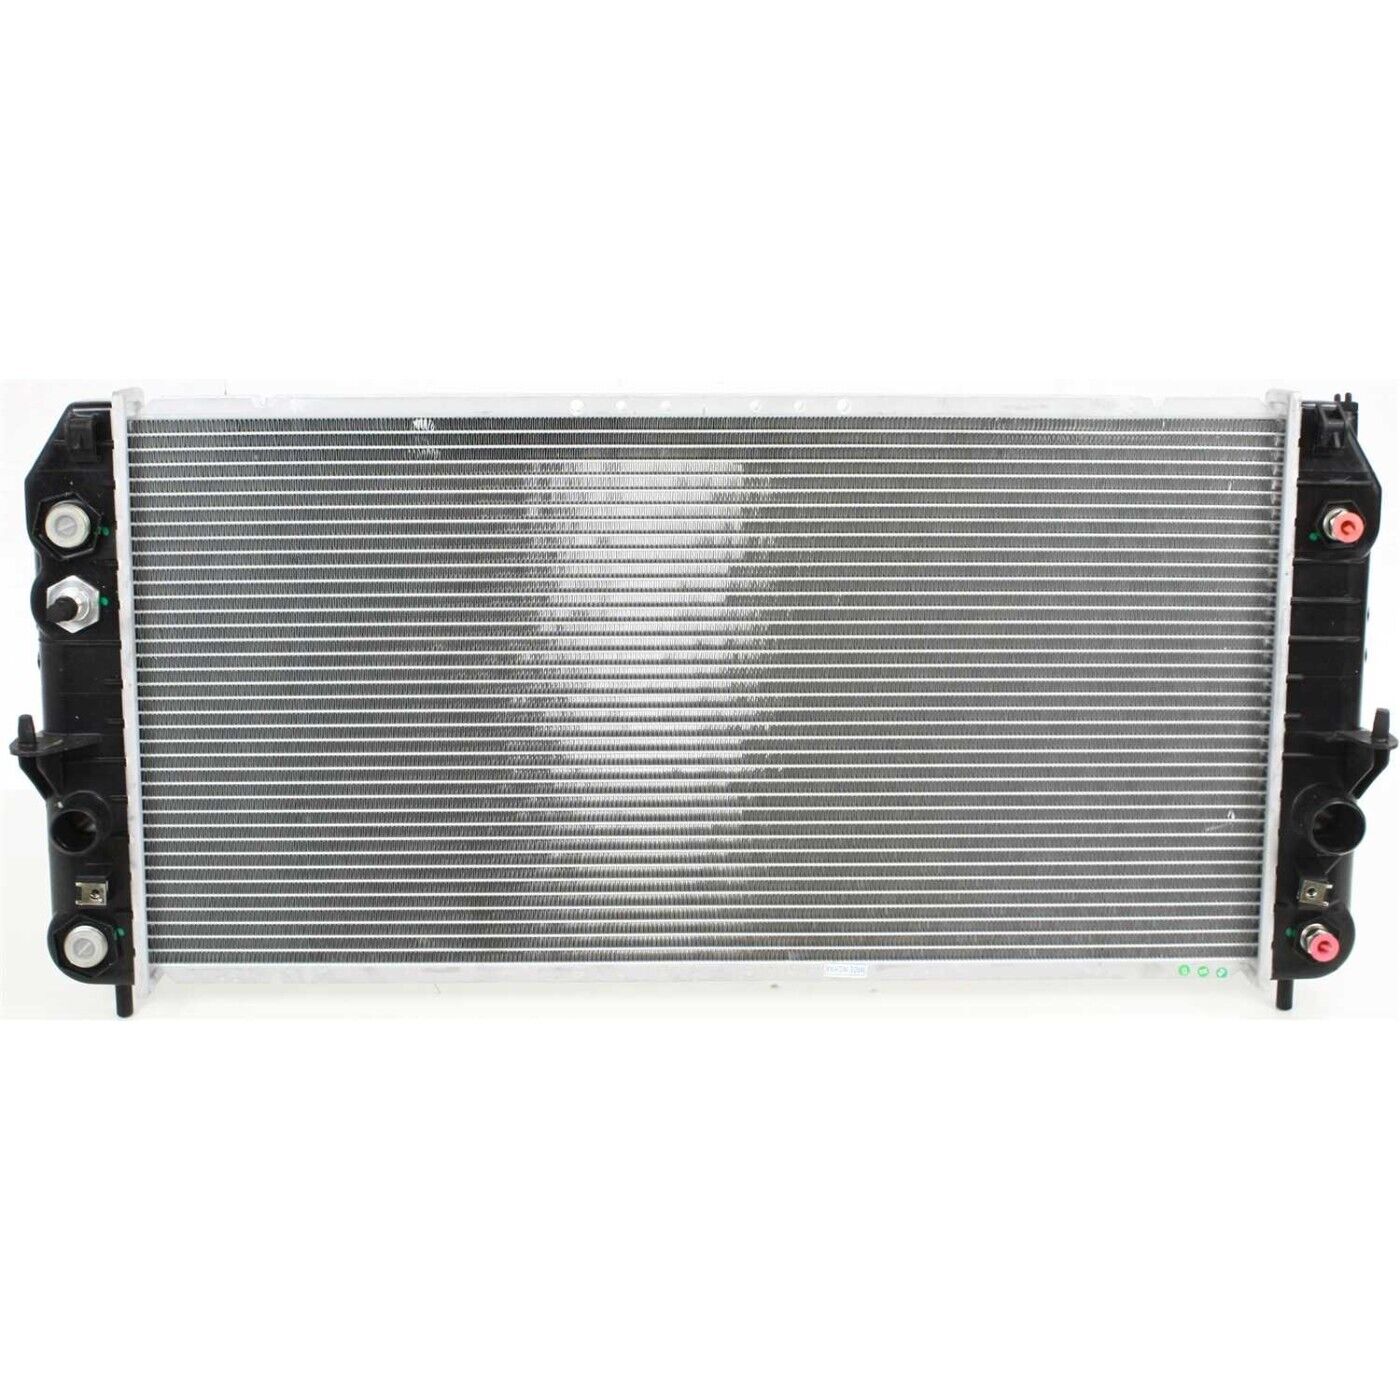 Radiator For 2000 Cadillac DeVille 4.6L 1 Row W/ Eng Oil Cooler